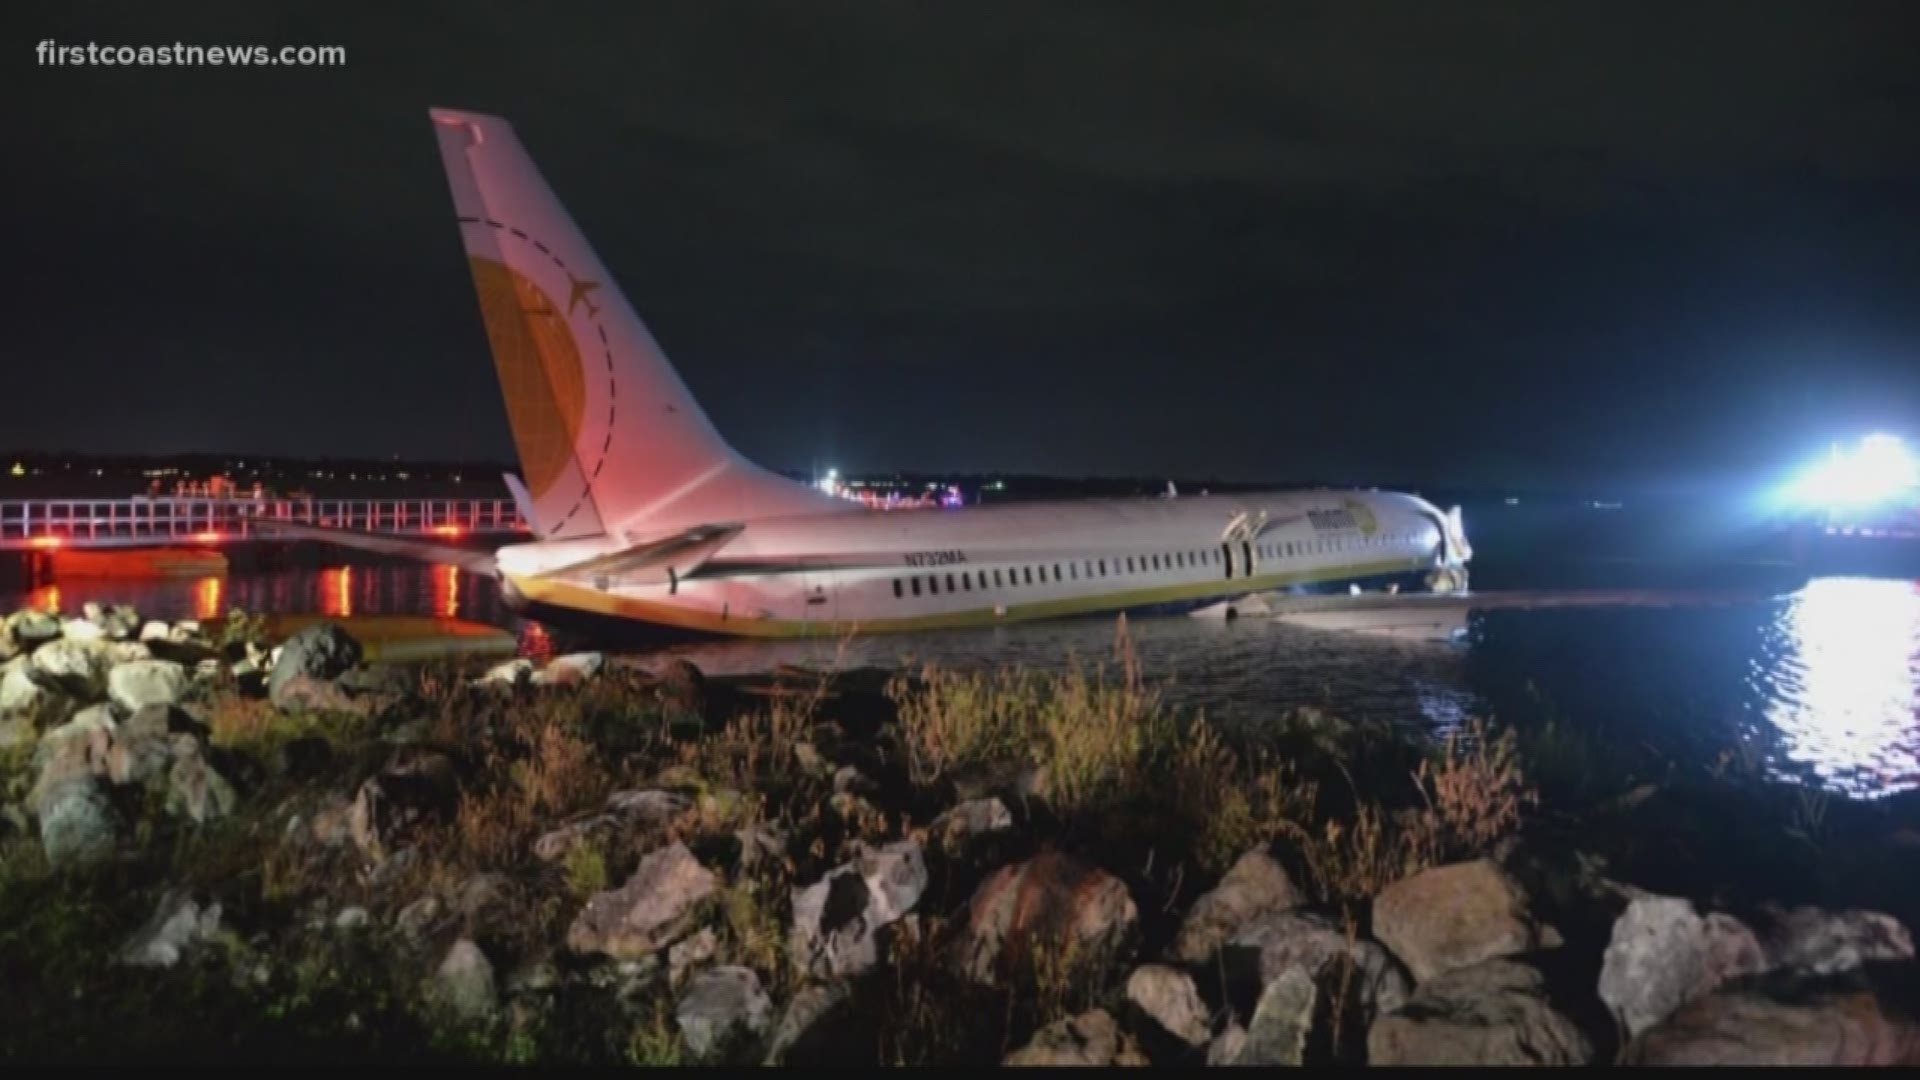 Of the 22 people who sought medical attention after a Boeing 737-800 plane skidded into the St. Johns River, a baby was among those hospitalized, according to a representative with NAS Jax.